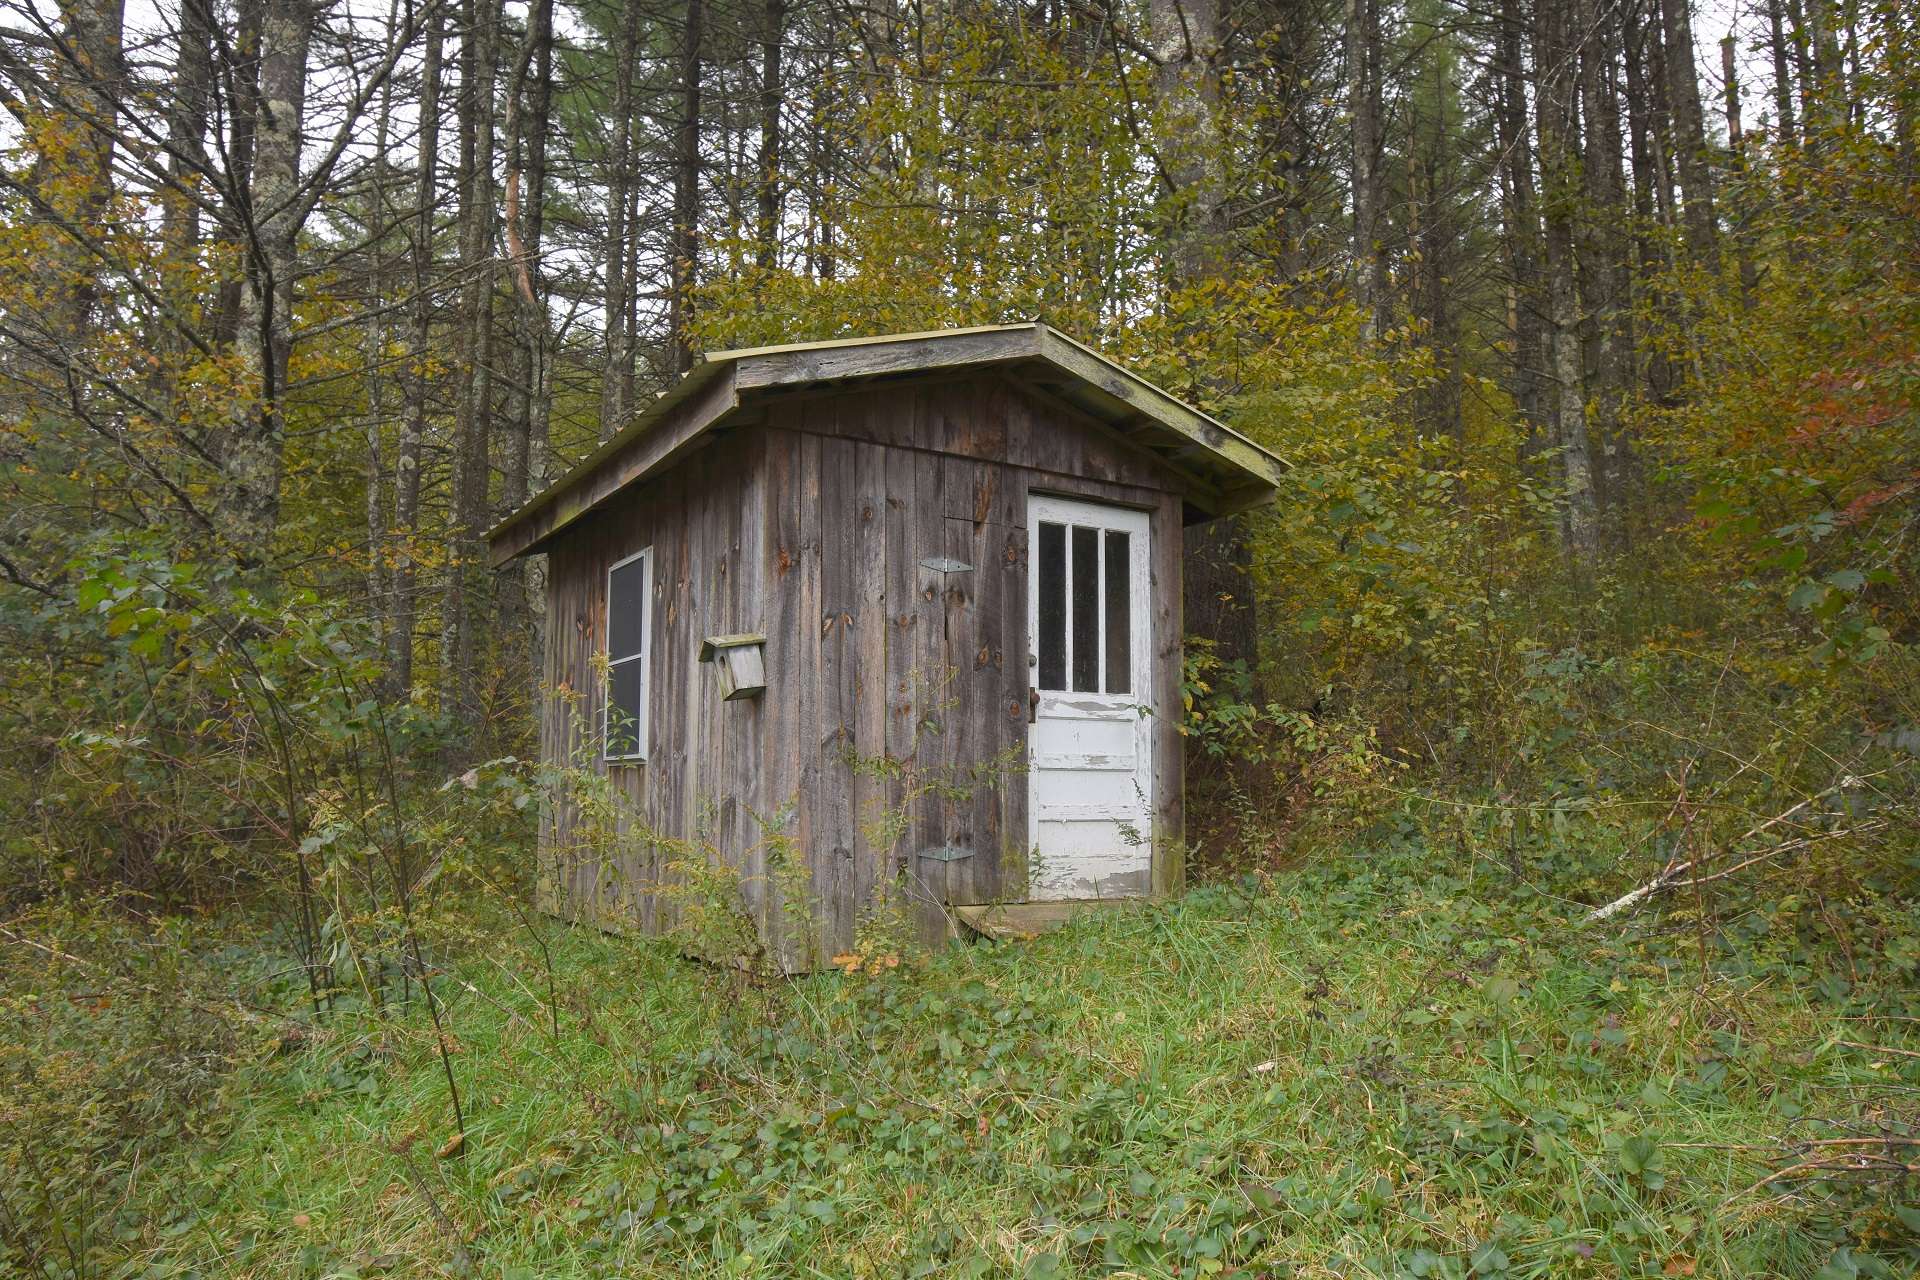 Abundant wildlife makes this acreage tract perfect for hunting.  There is also an outbuilding on the property for storage or possibly camping.  An existing well and septic is in place, however there is no documentation on the septic system.